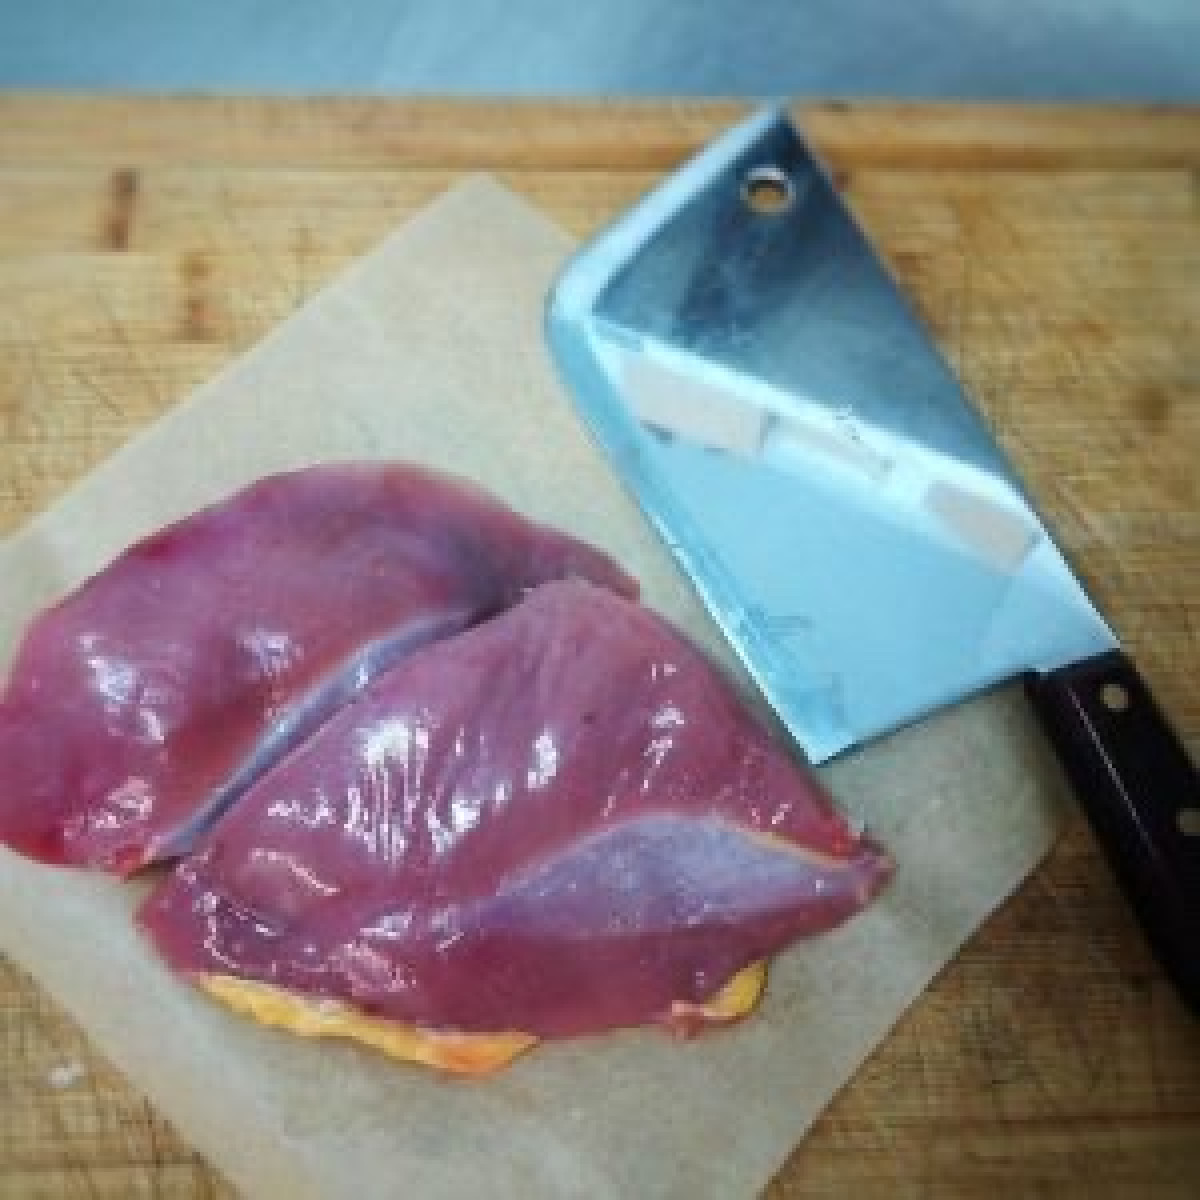 Product picture for Pheasant breasts - FROZEN